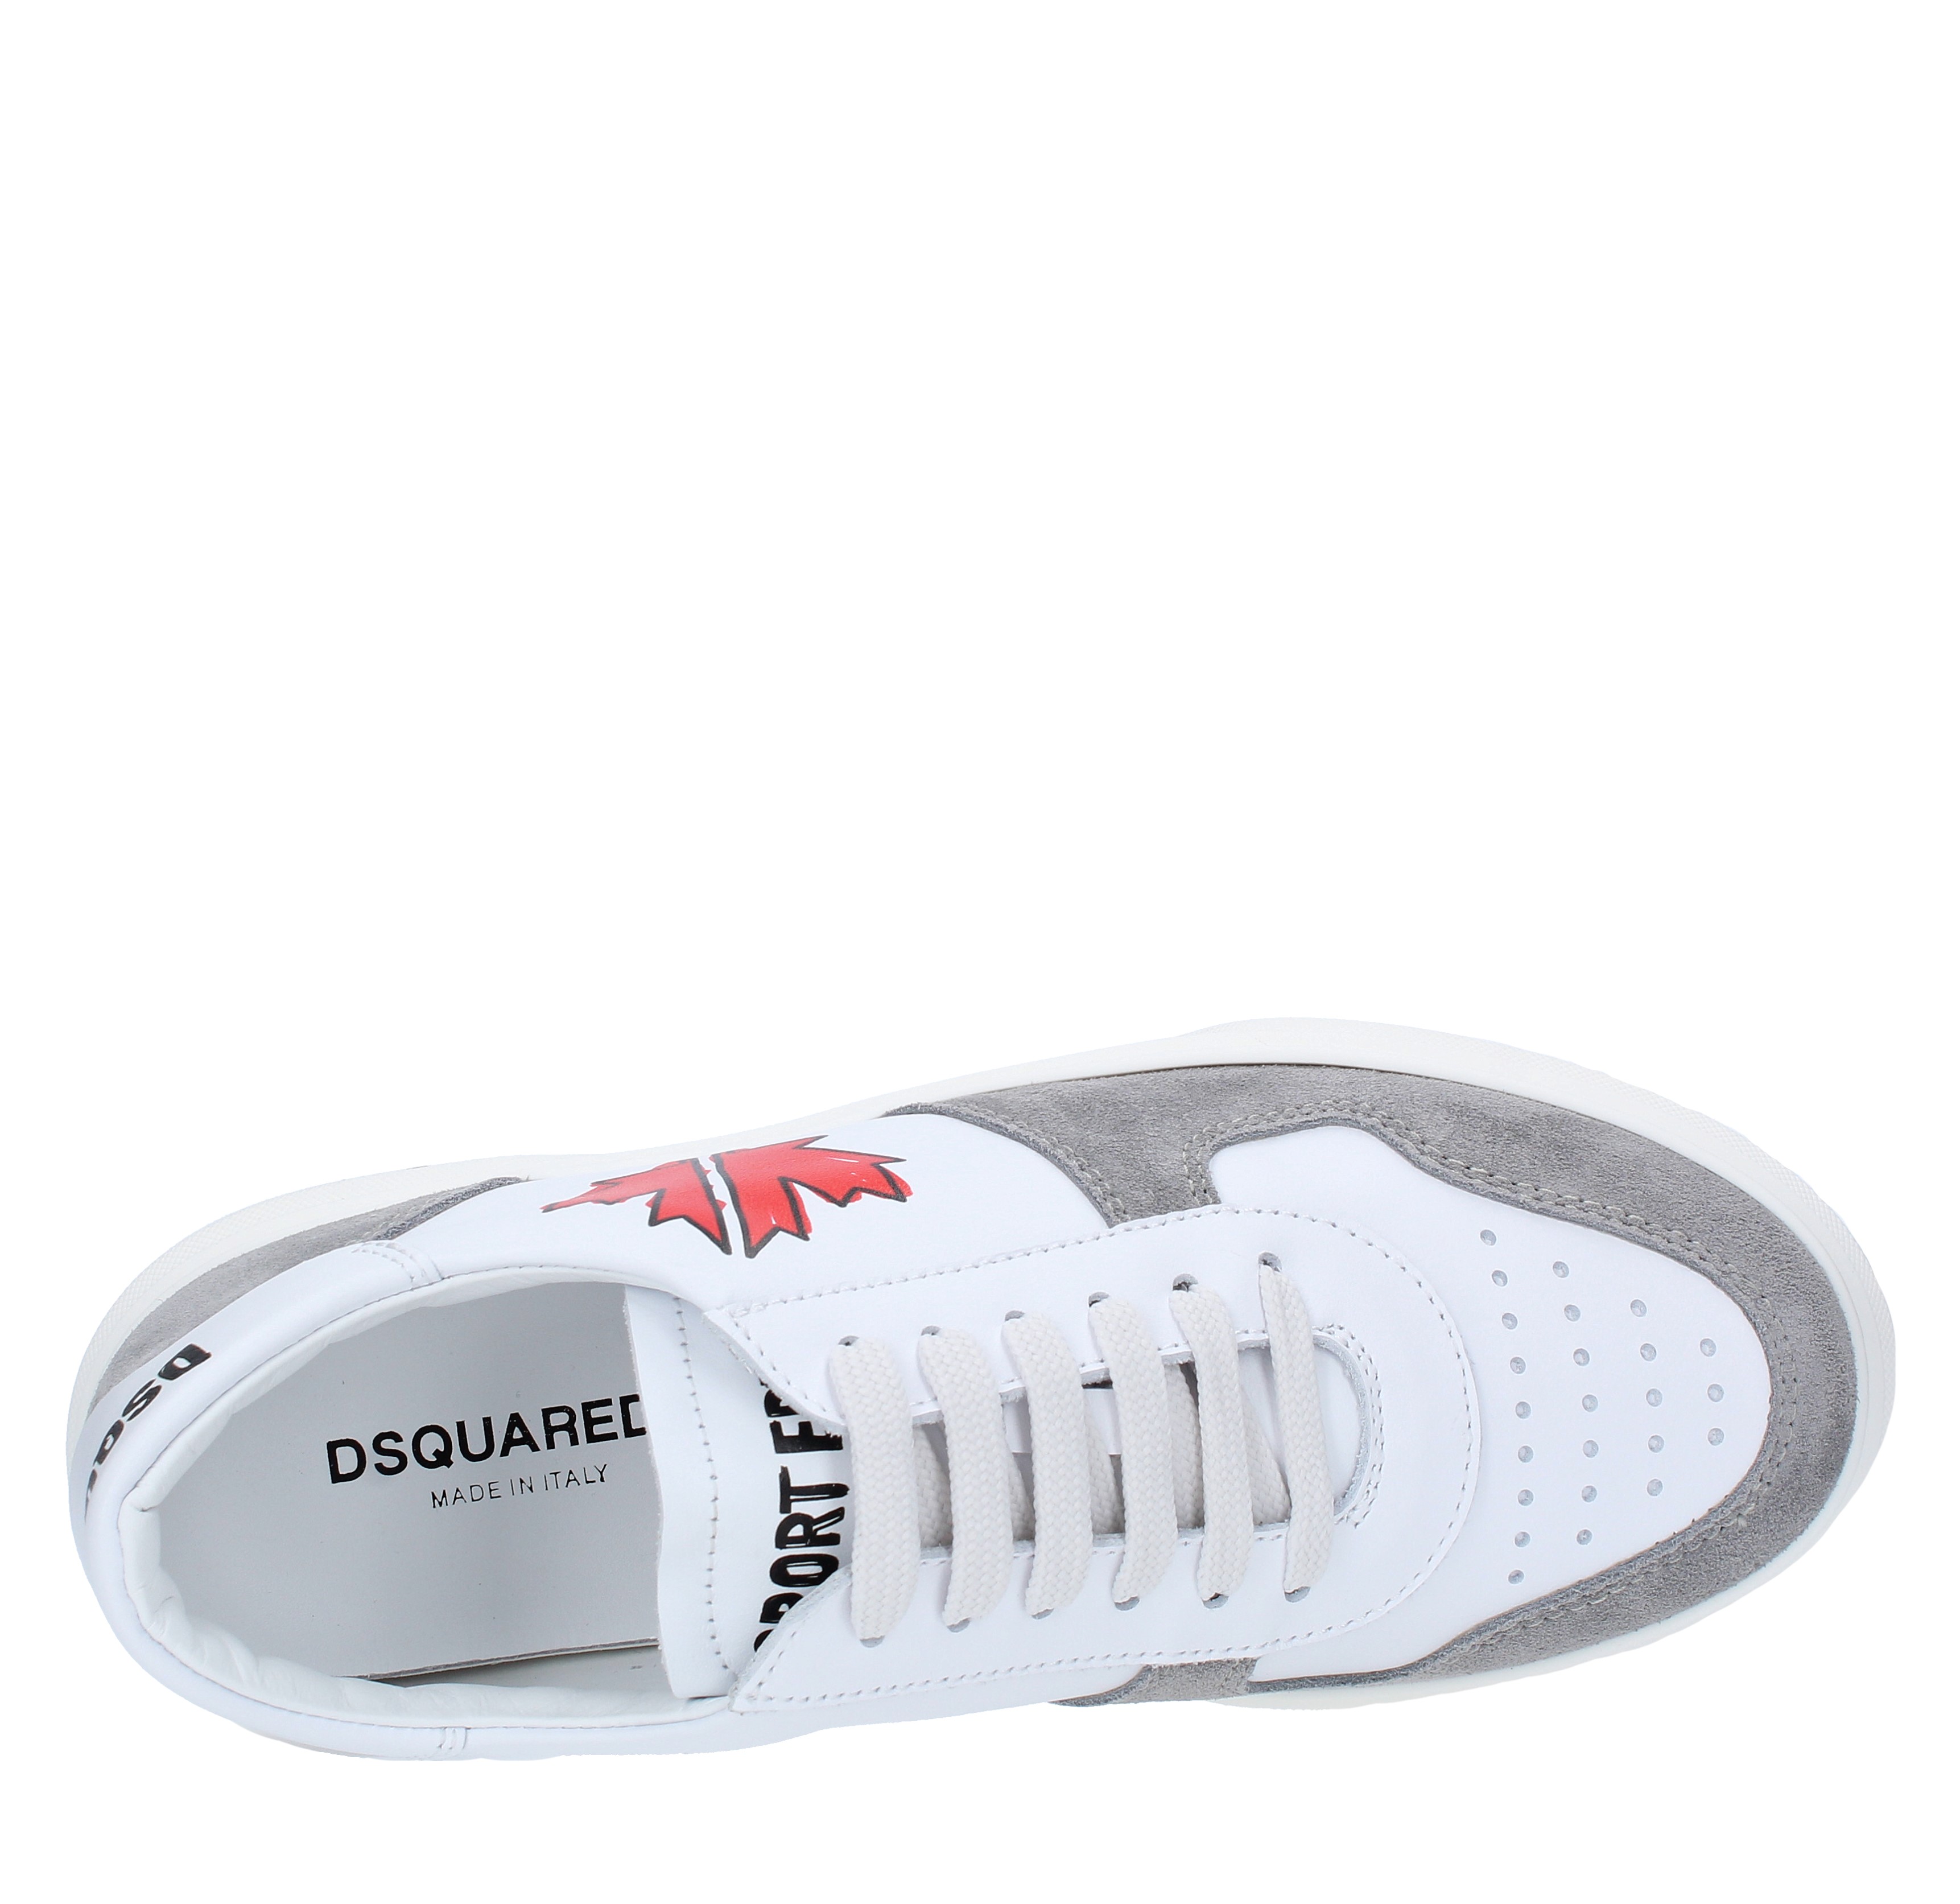 Sneakers in pelle - DSQUARED2 - Ginevra calzature